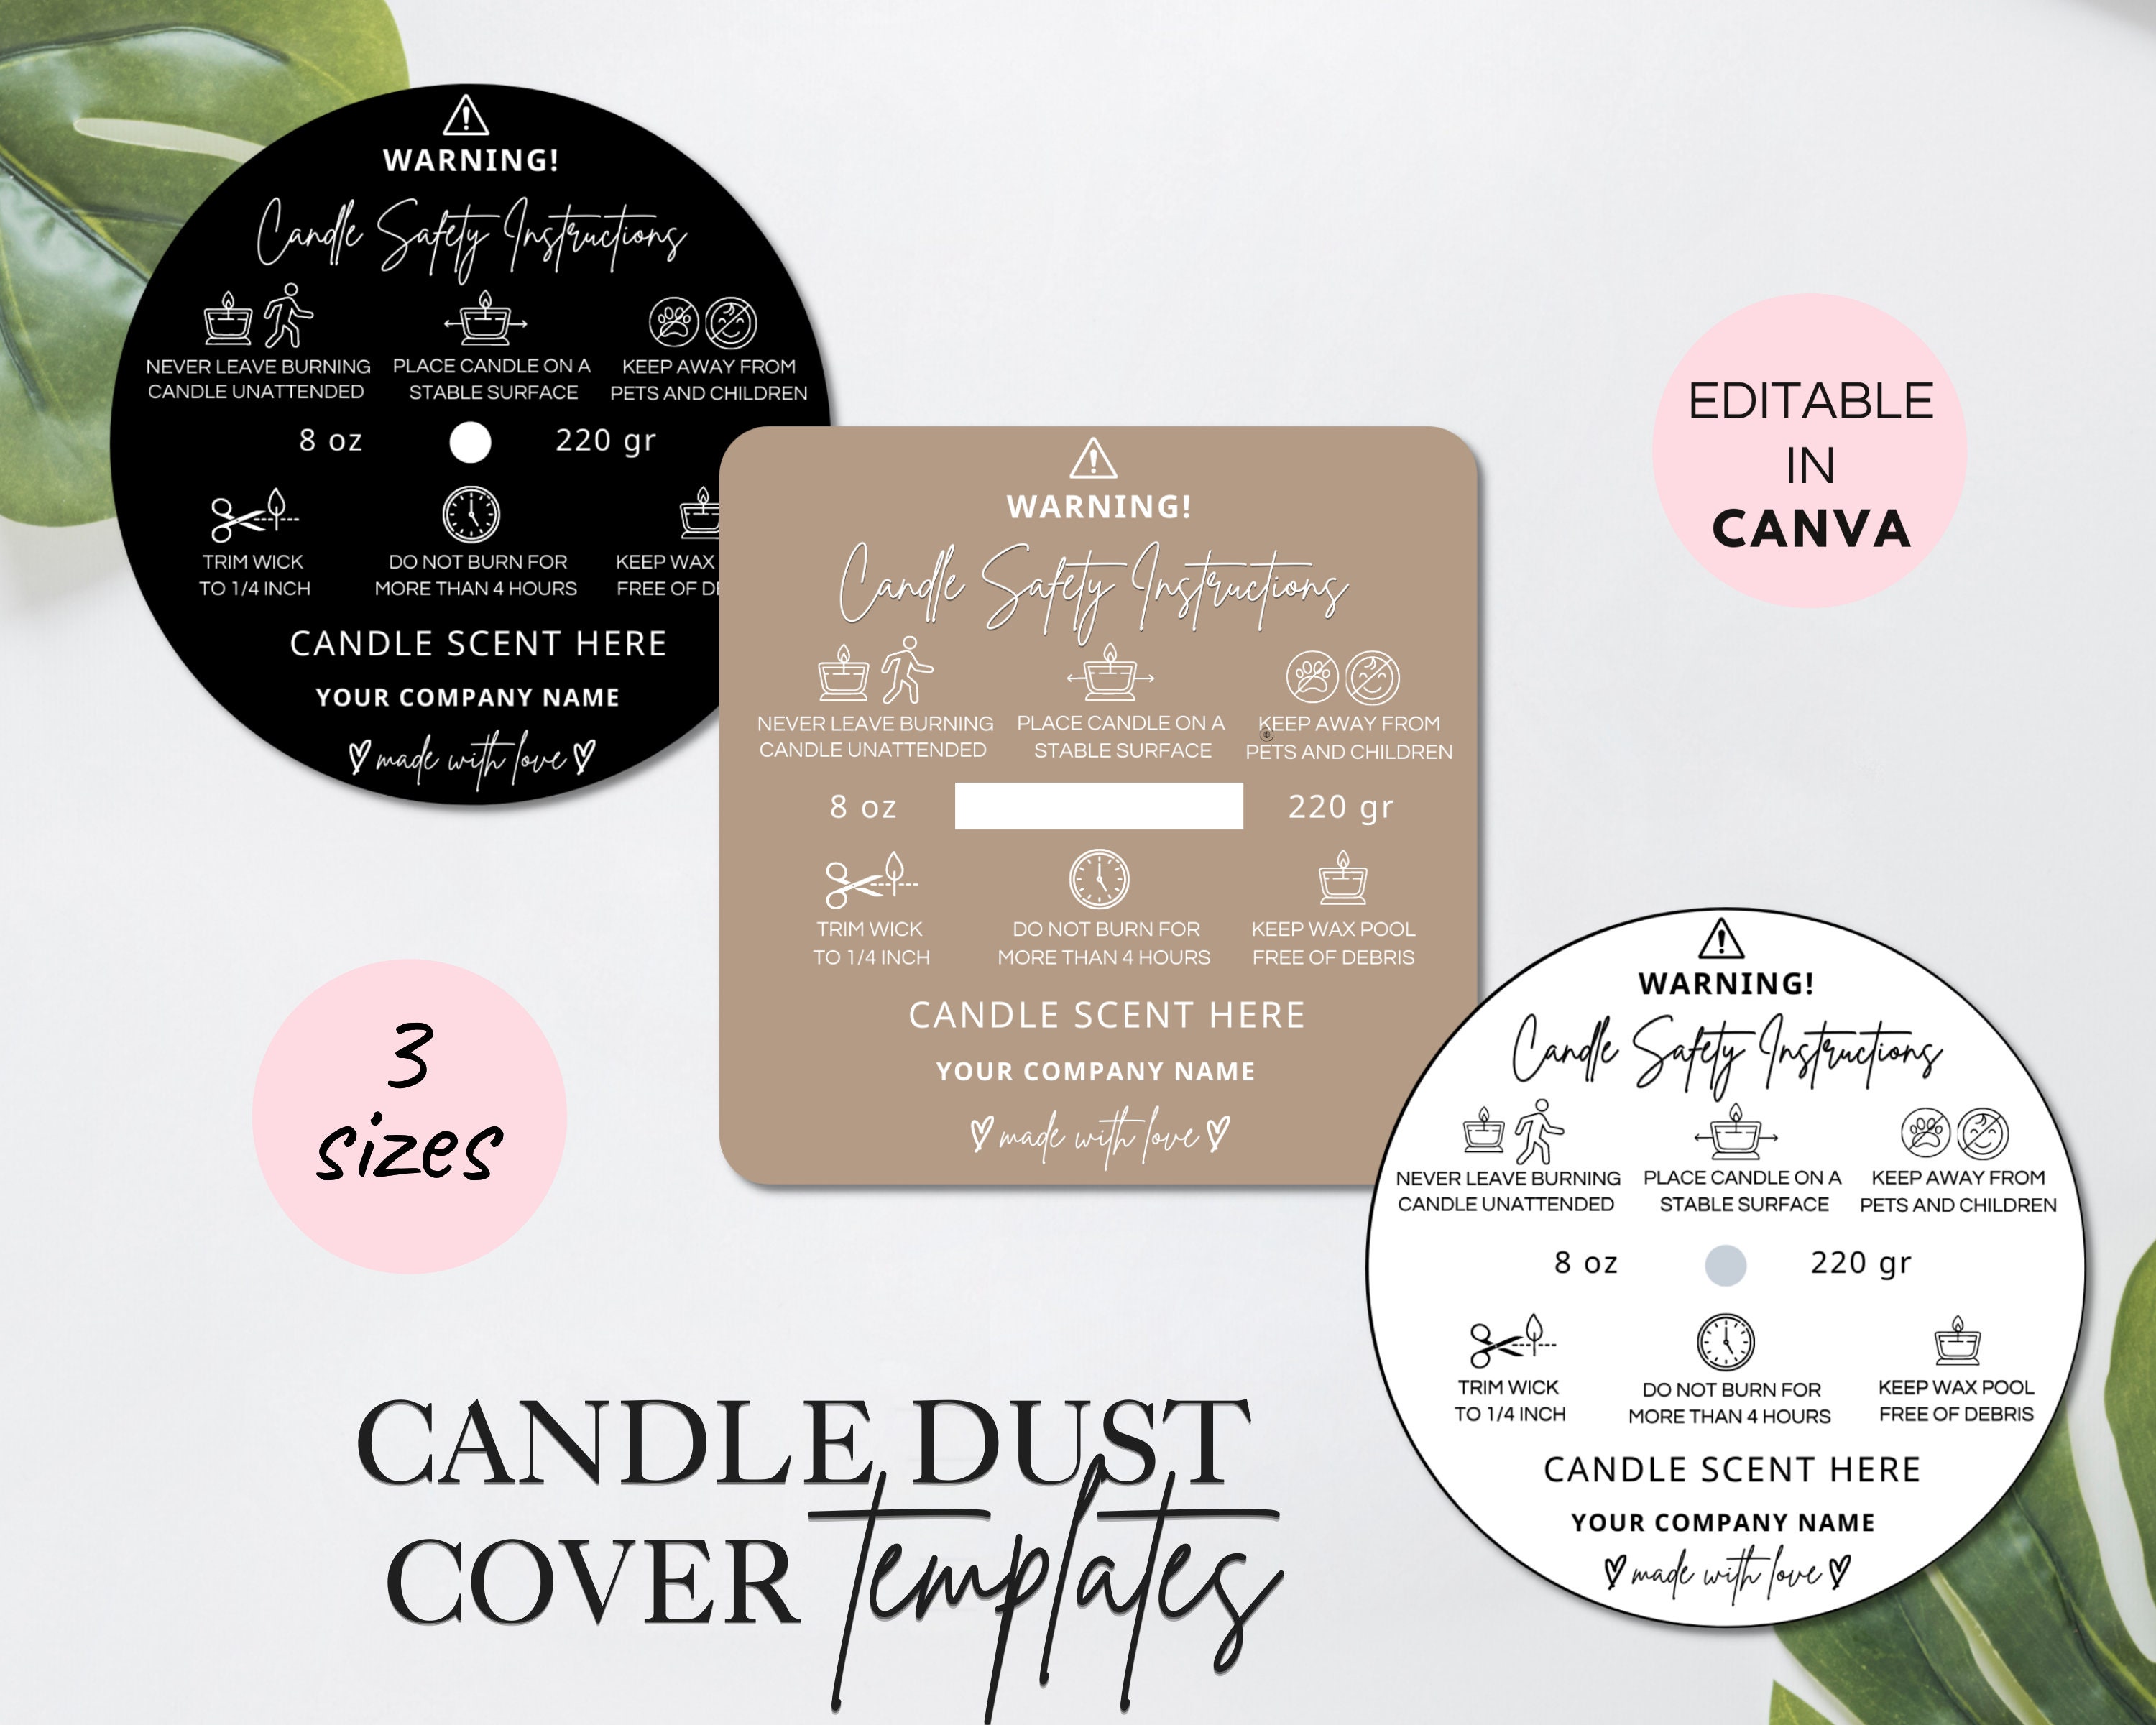 Candle Dust Cover Canva Template - 6 Variations